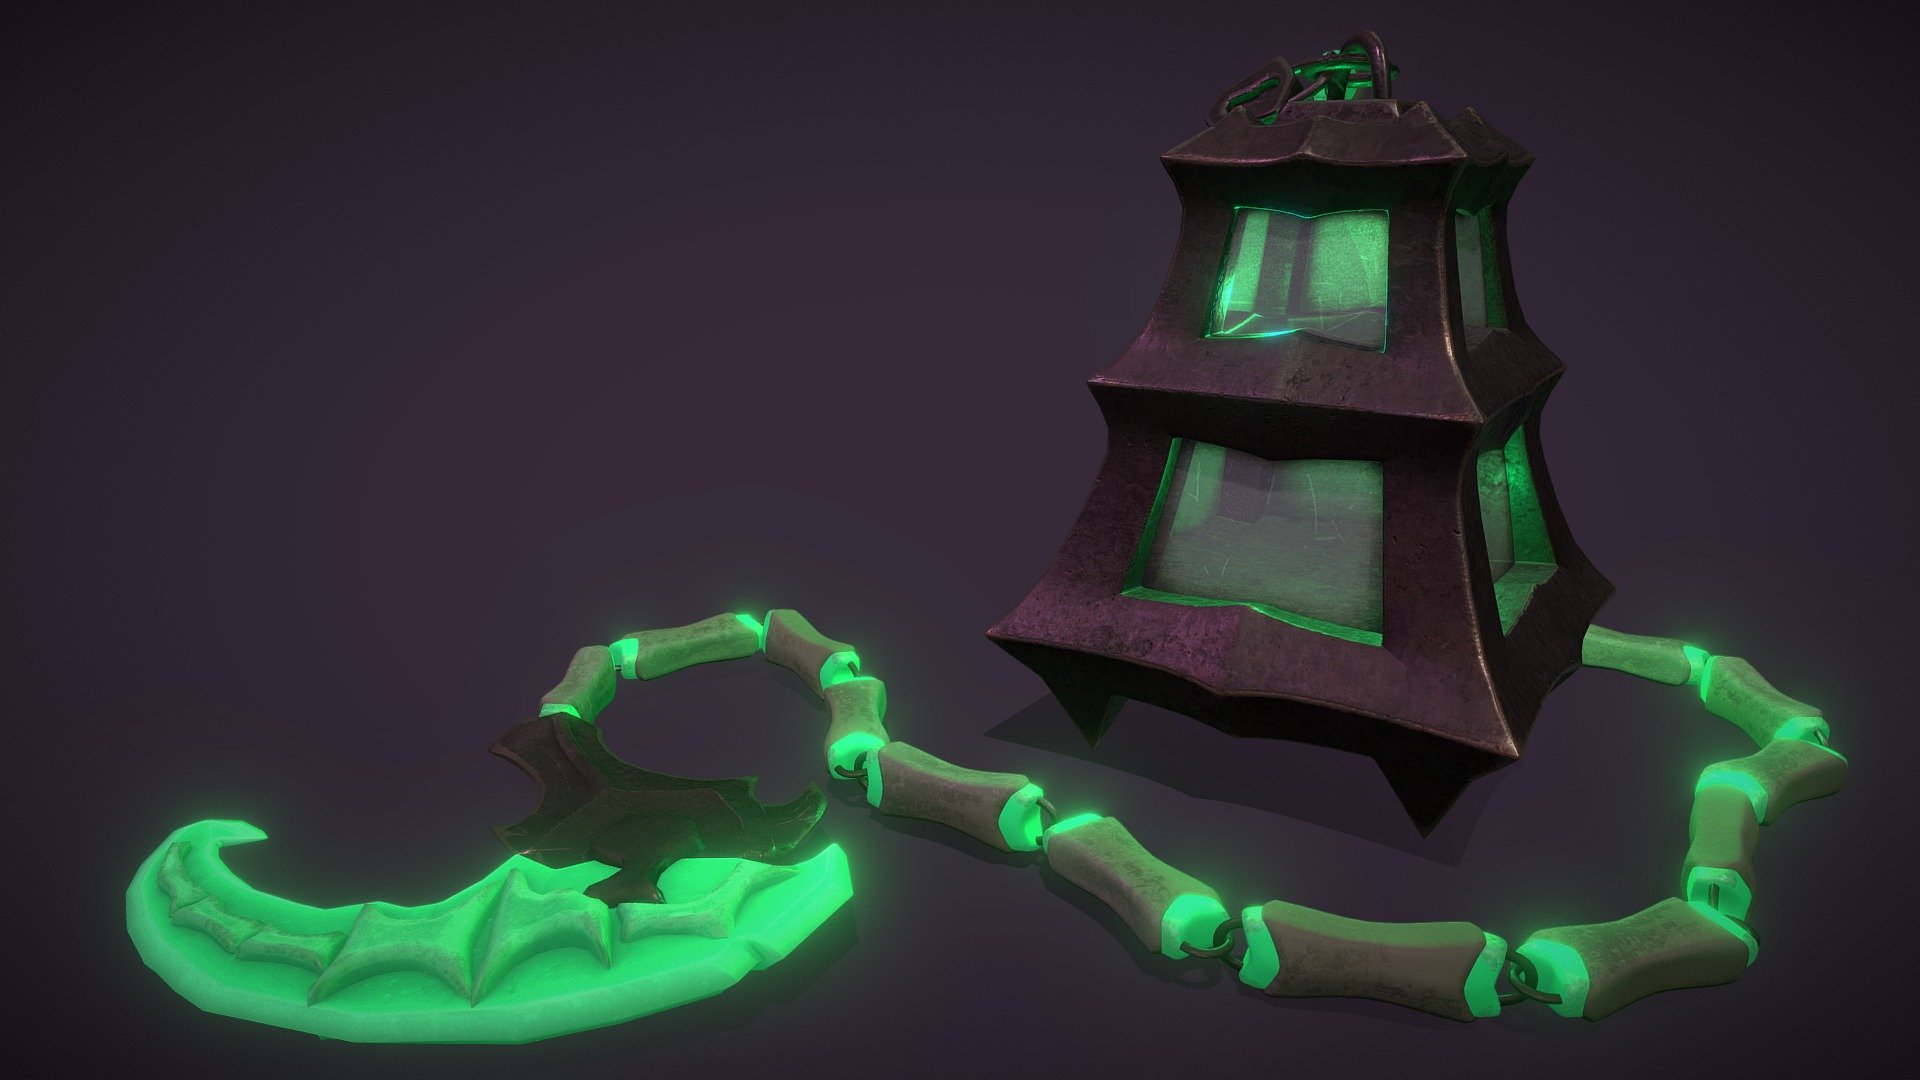 My version of Thresh's lantern and scythe from League of Legends.
School assignment for realism textures 3d model